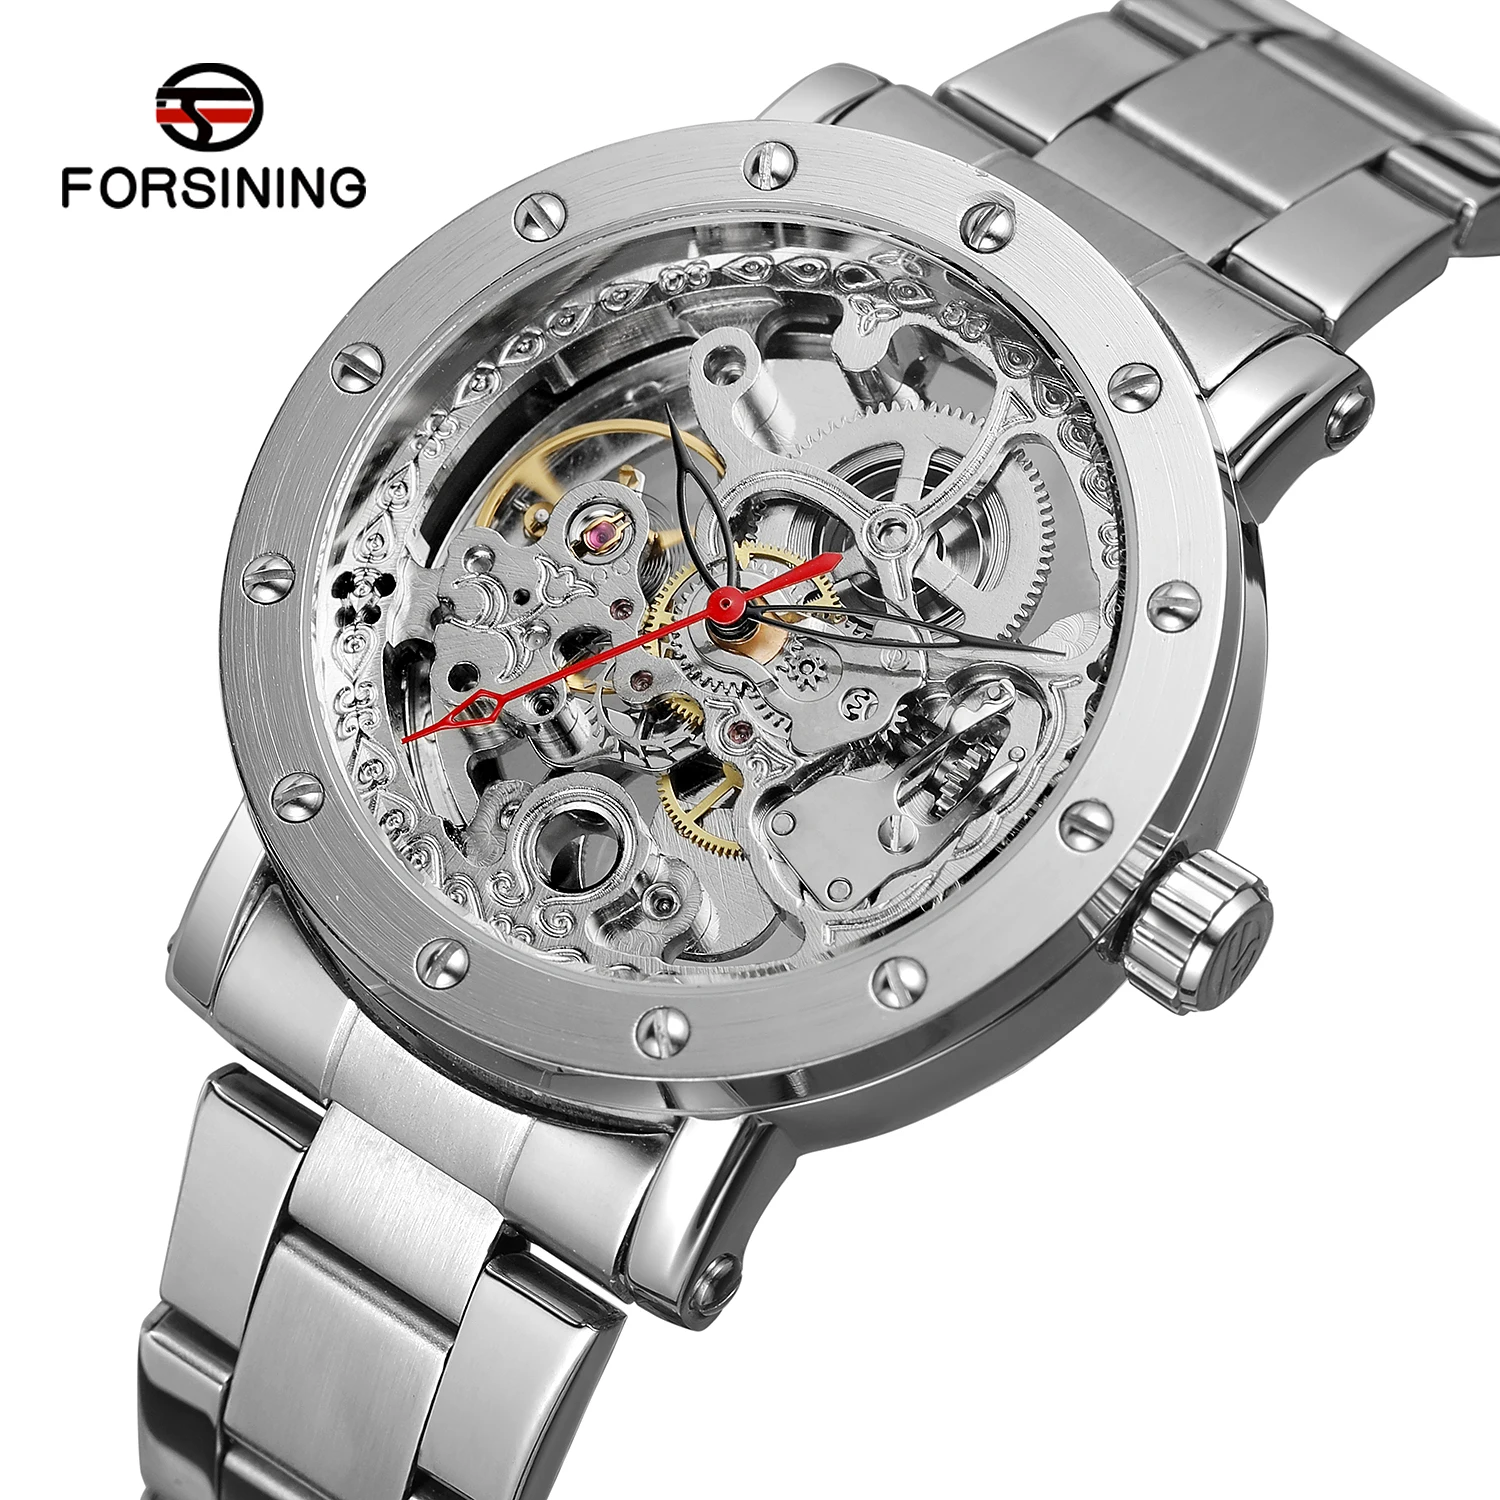 

Fancy and Stylish FORSINING man watches Top Brand Luxury Hollow Skeleton Mechanical Automatic wristwatch reloj hombre automatico